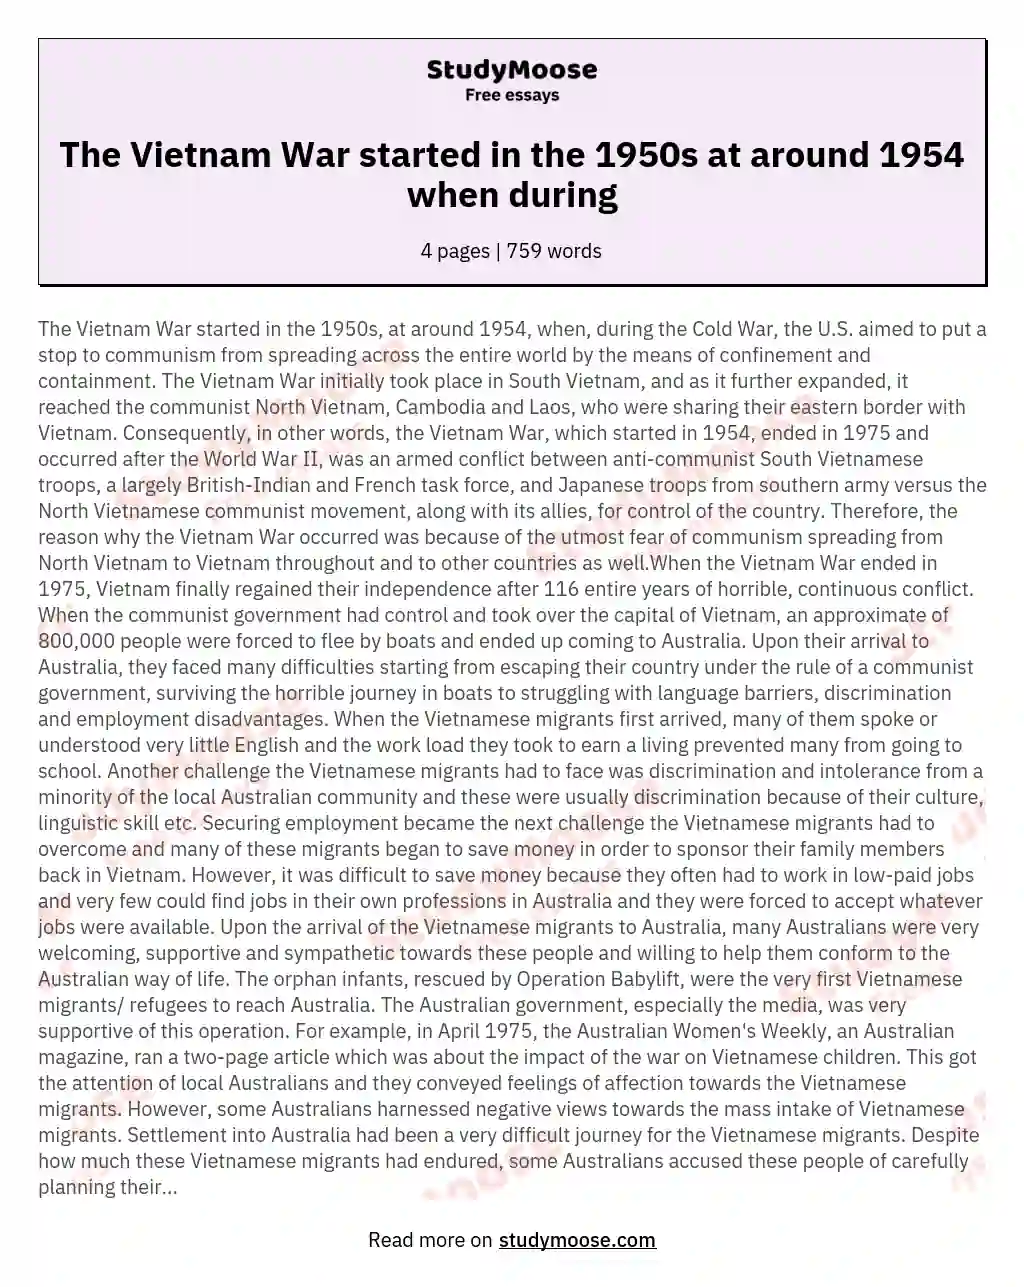 The Vietnam War started in the 1950s at around 1954 when during essay